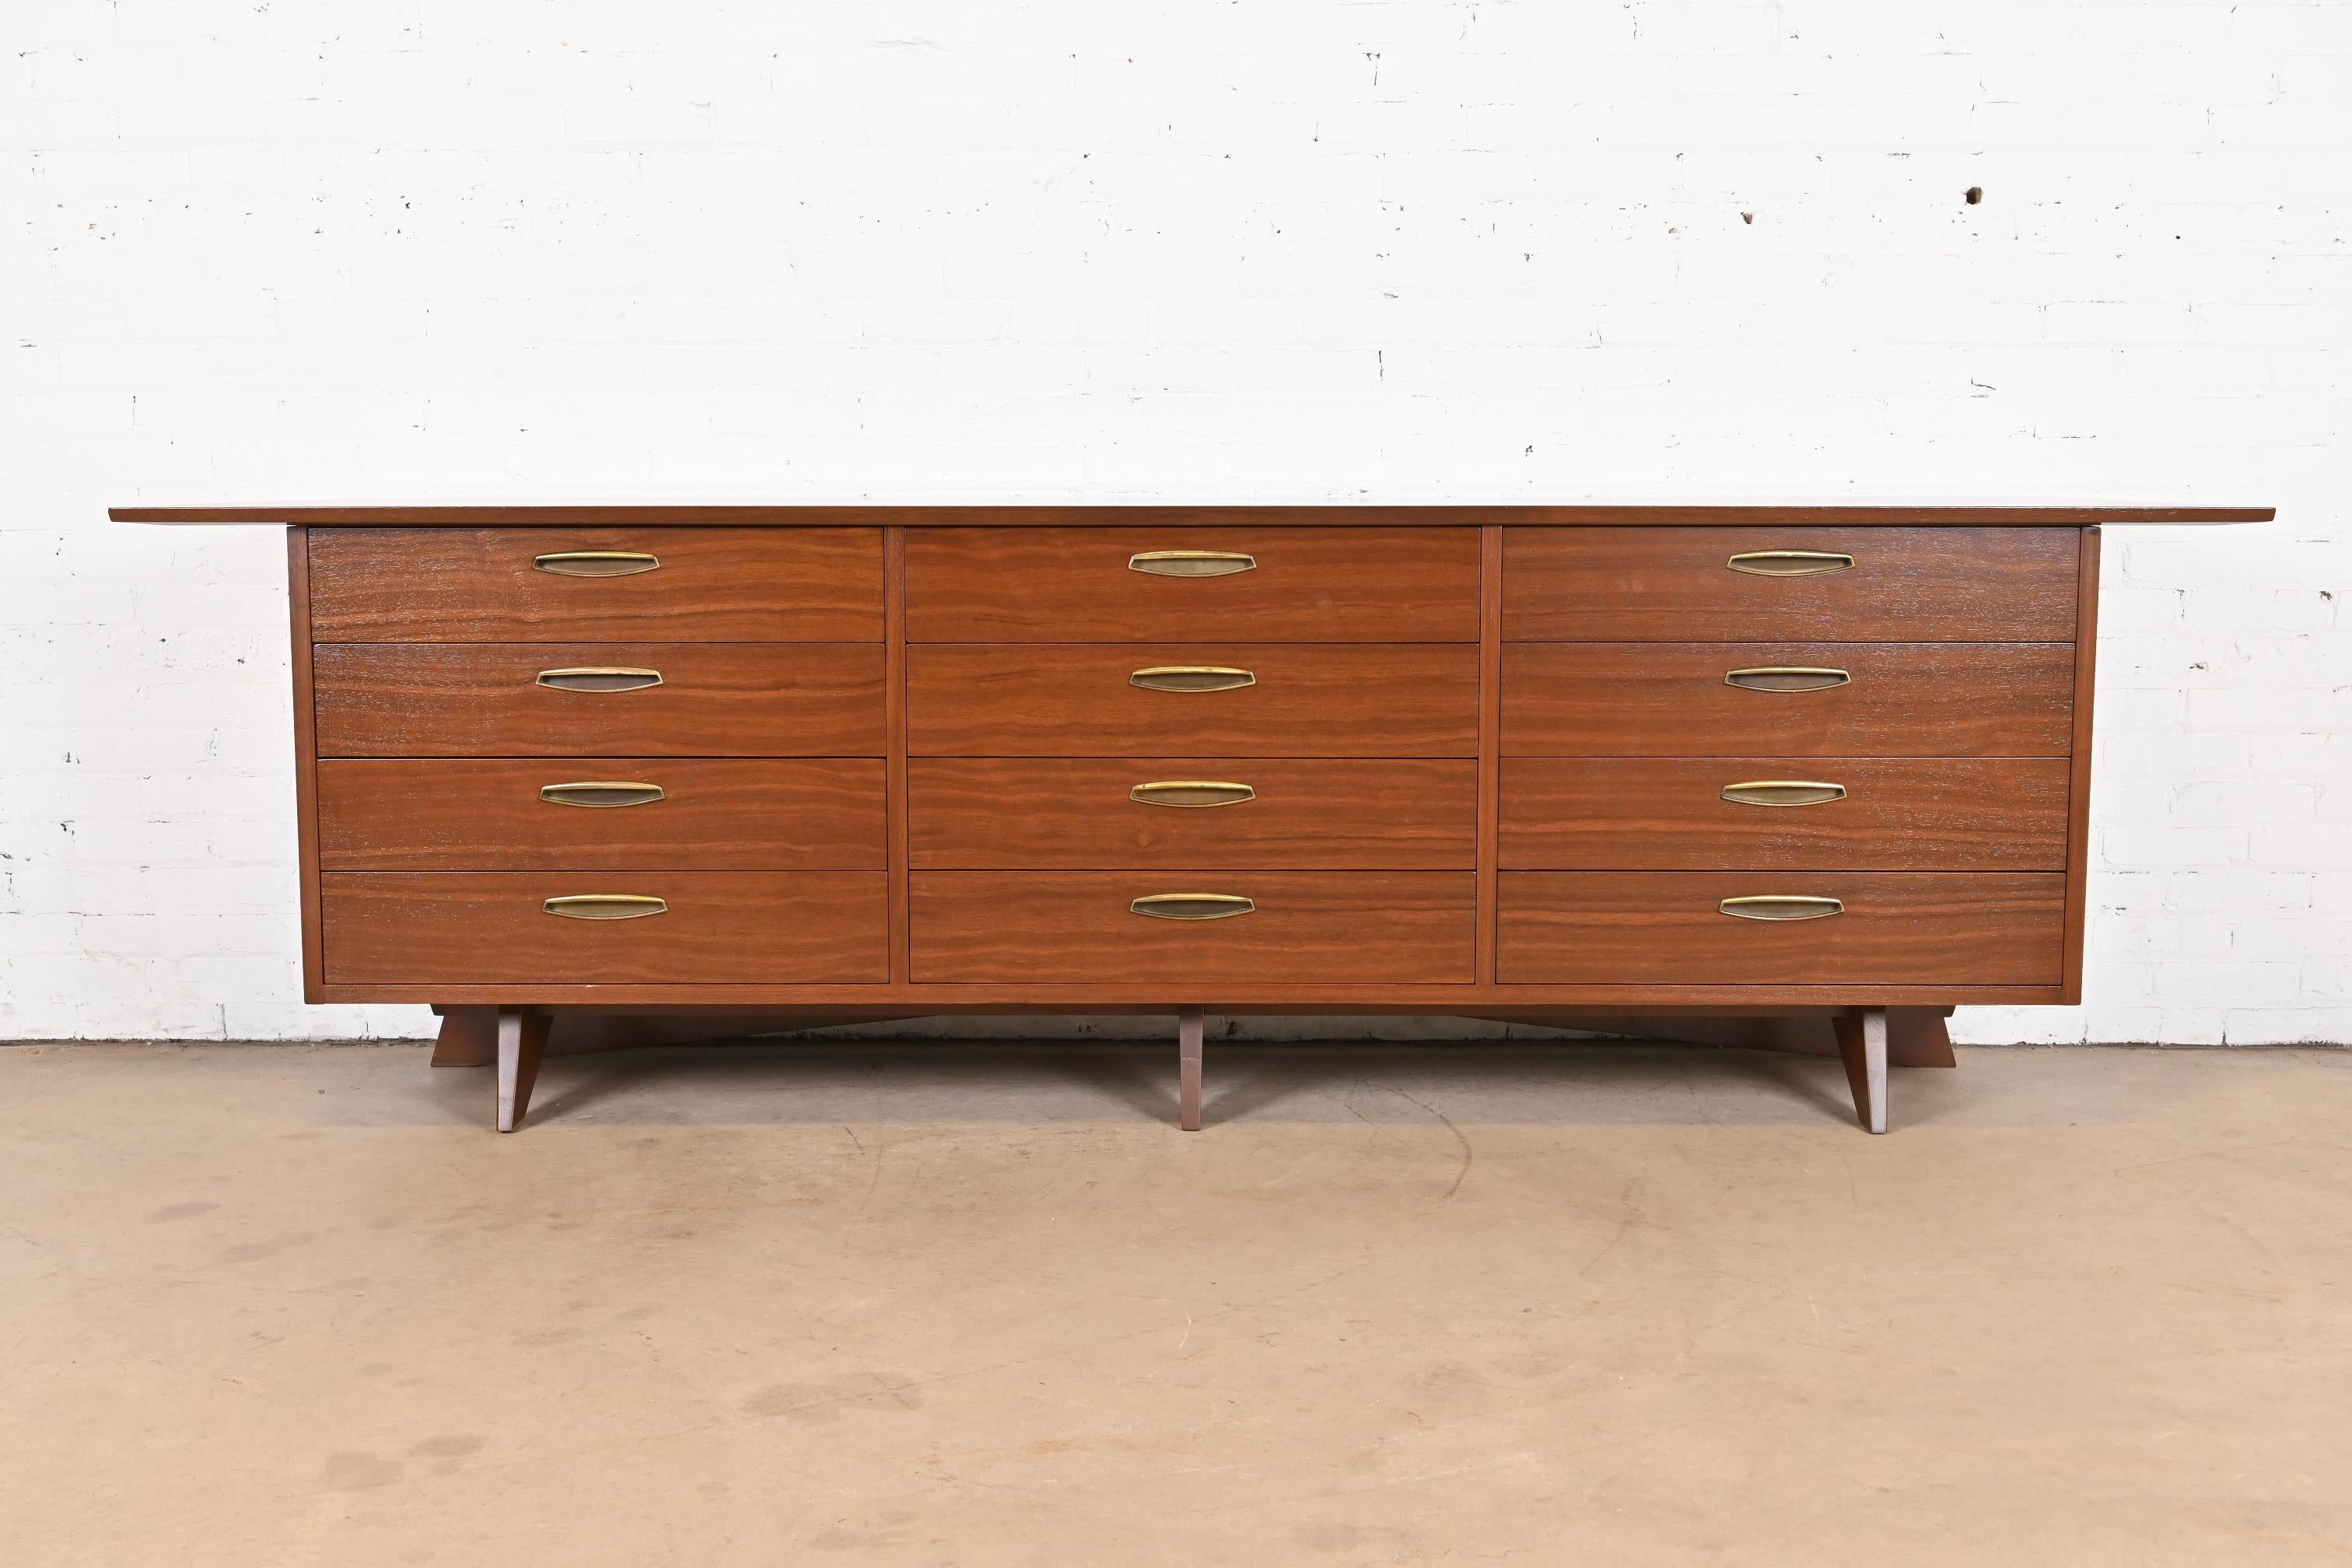 A very rare and exceptional mid-century Organic Modern monumental triple dresser, sideboard, or credenza

By George Nakashima for Widdicomb Furniture, 